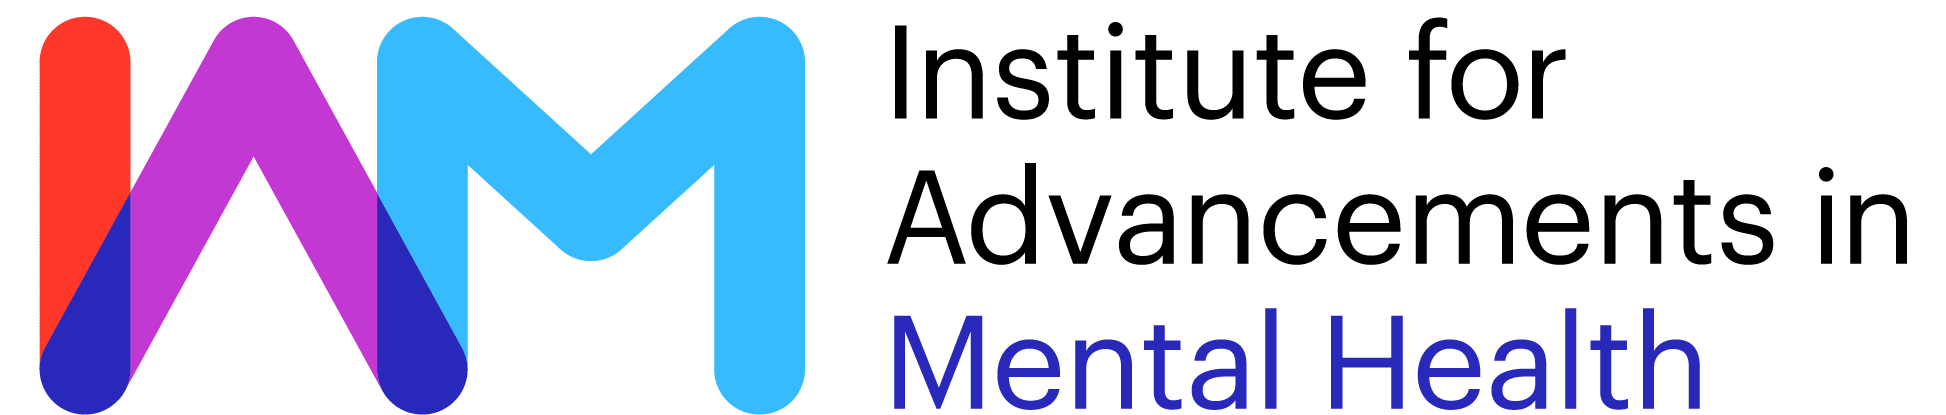 Canadian Institute for Advancements in Mental Health logo